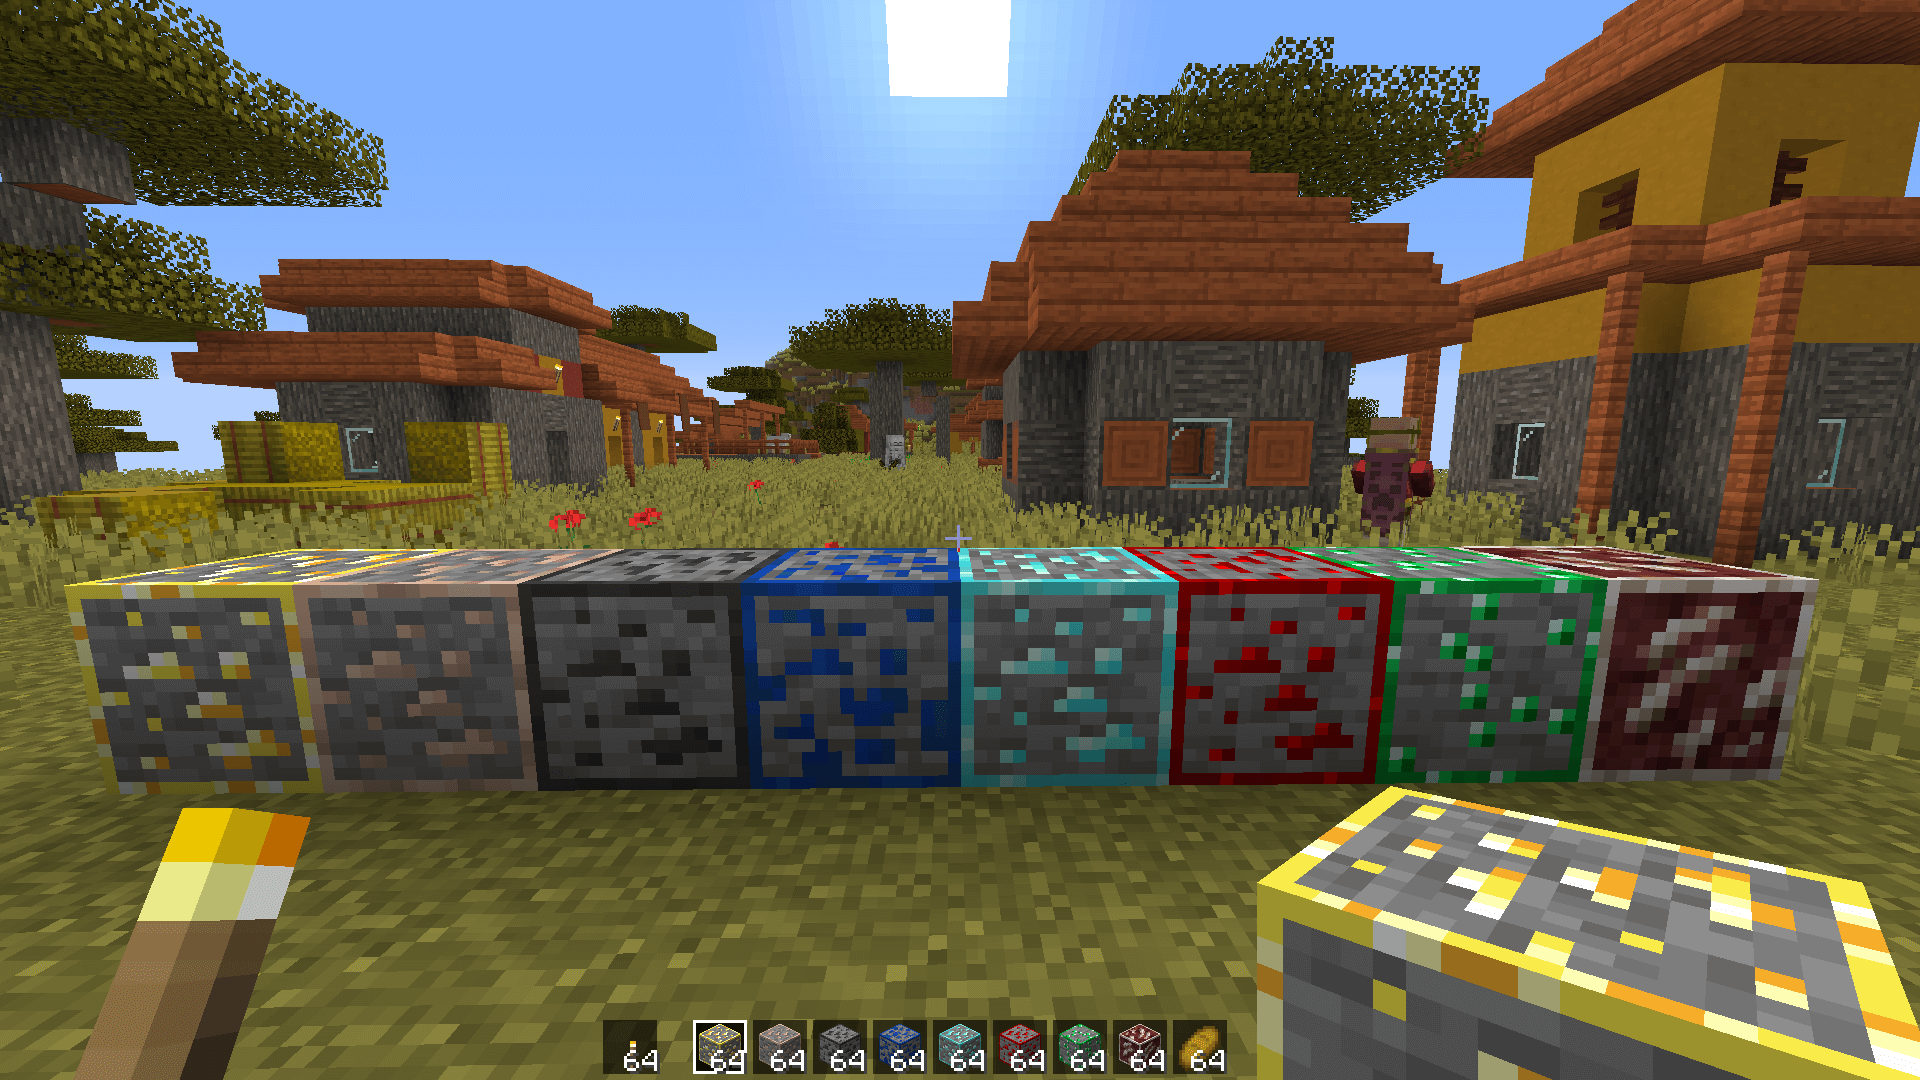 Better visibility of ores screenshot 1